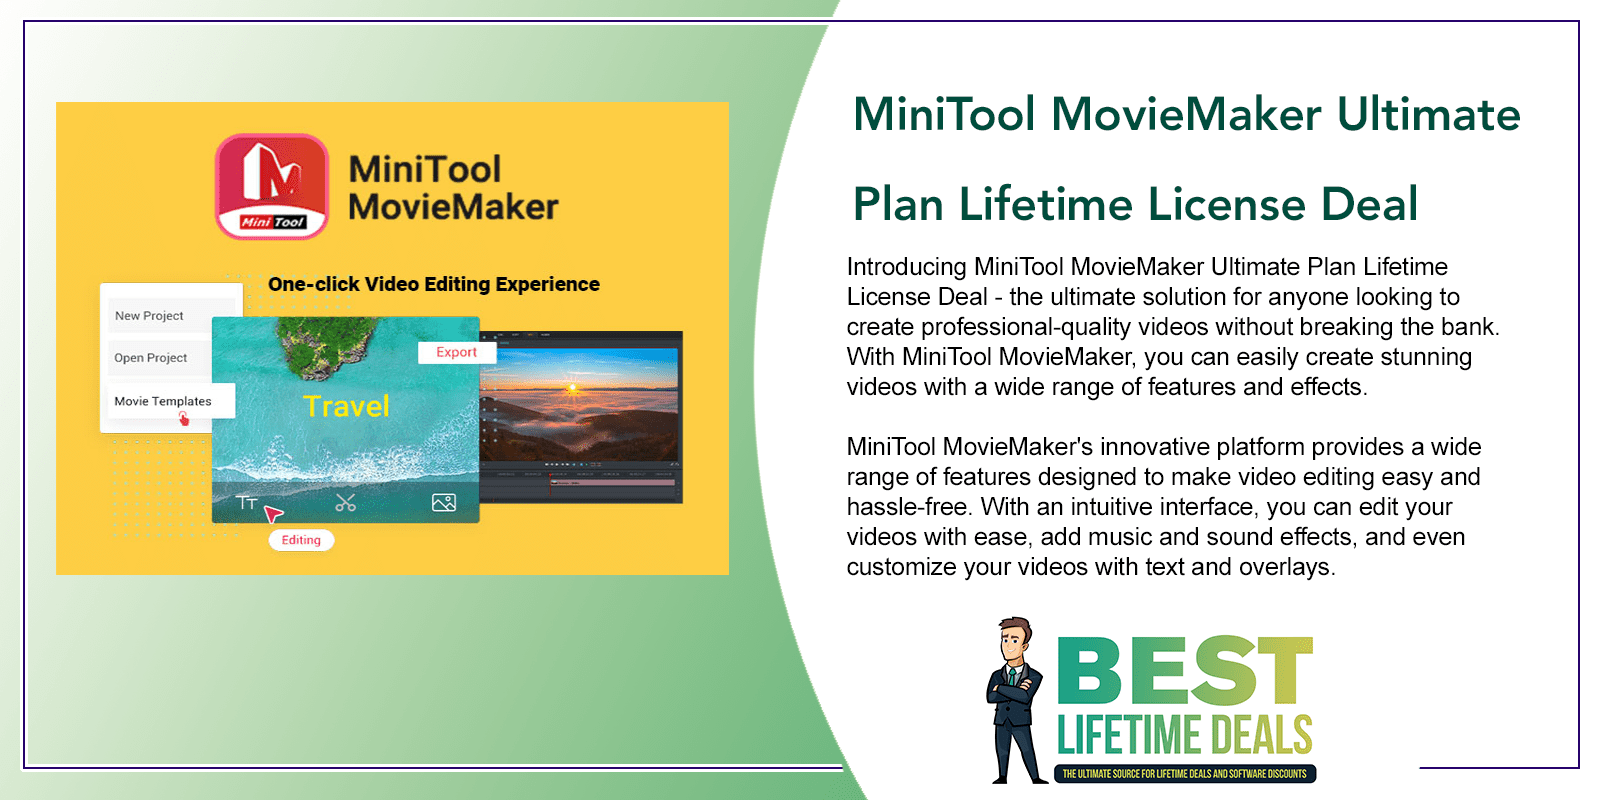 MiniTool MovieMaker Ultimate Plan Lifetime License Deal Featured Image